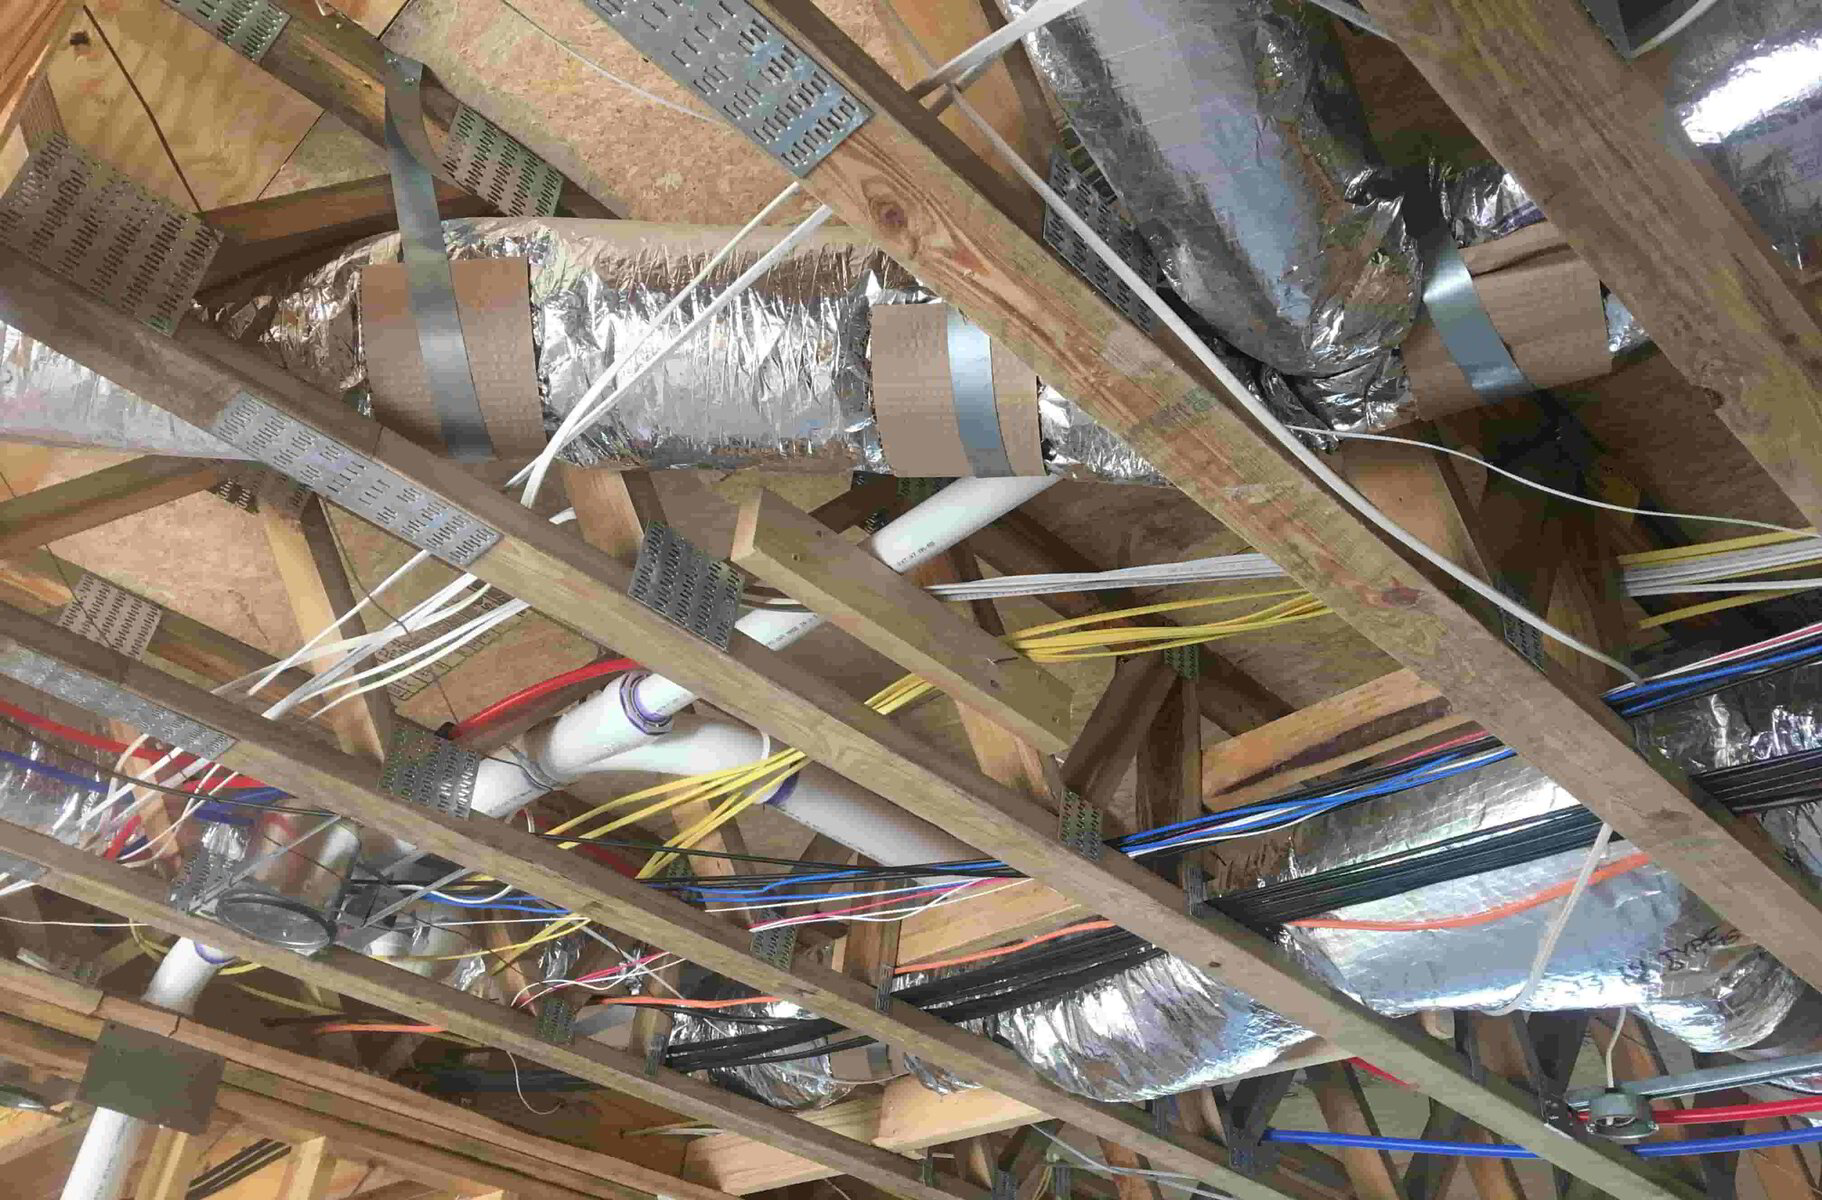 AC ducts in residential home attic